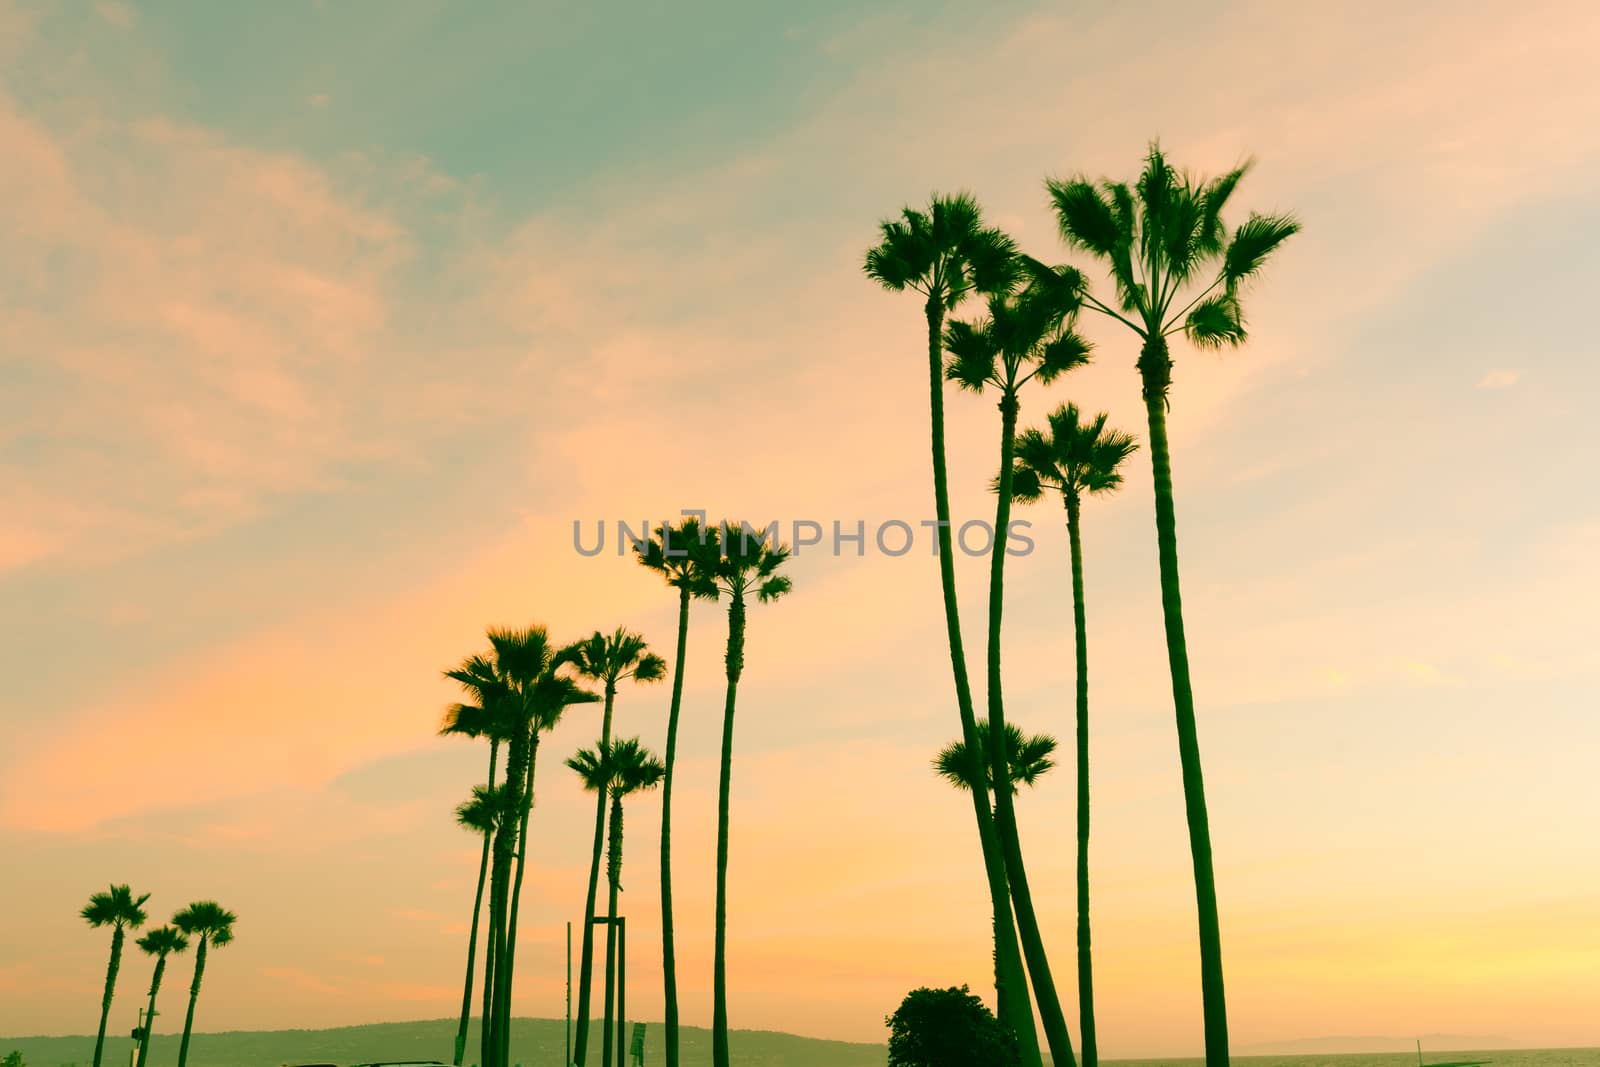 Retro style Californian nights colorful sky and silhouette plams swaying inn breeze at sunset at Manhattan Beach.